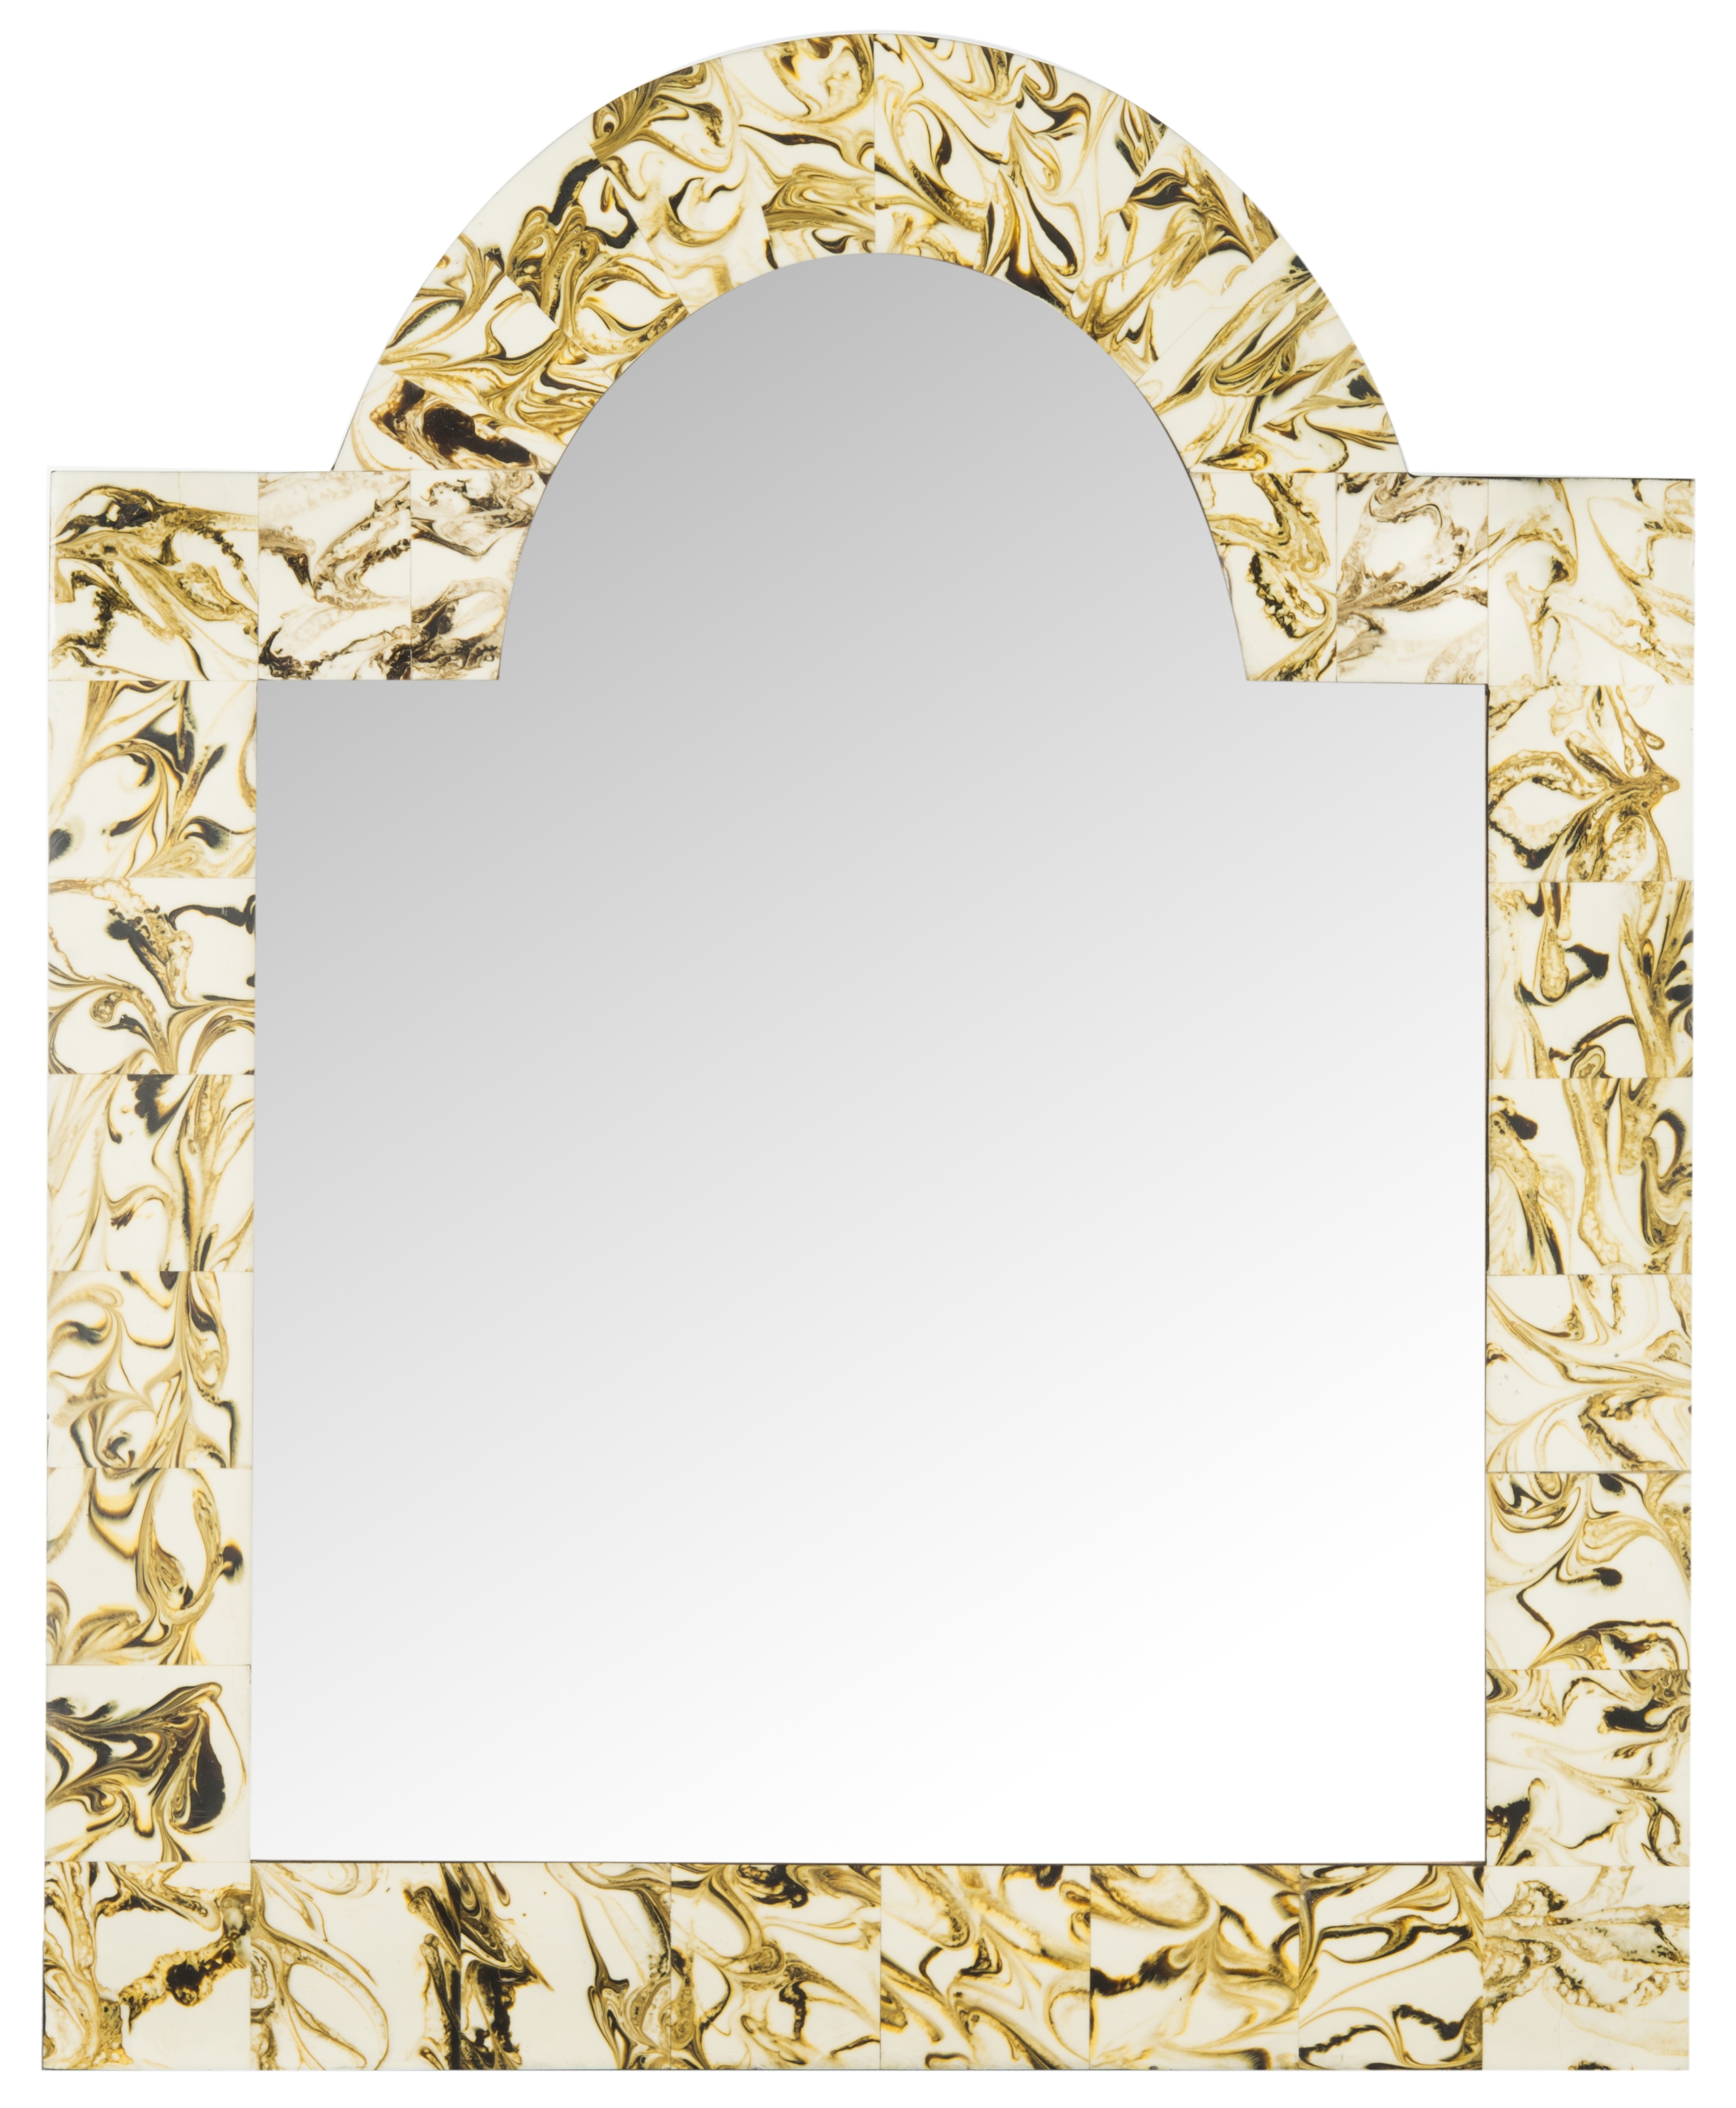 Antibes Arched Mirror - Multi - Arlo Home - Image 0